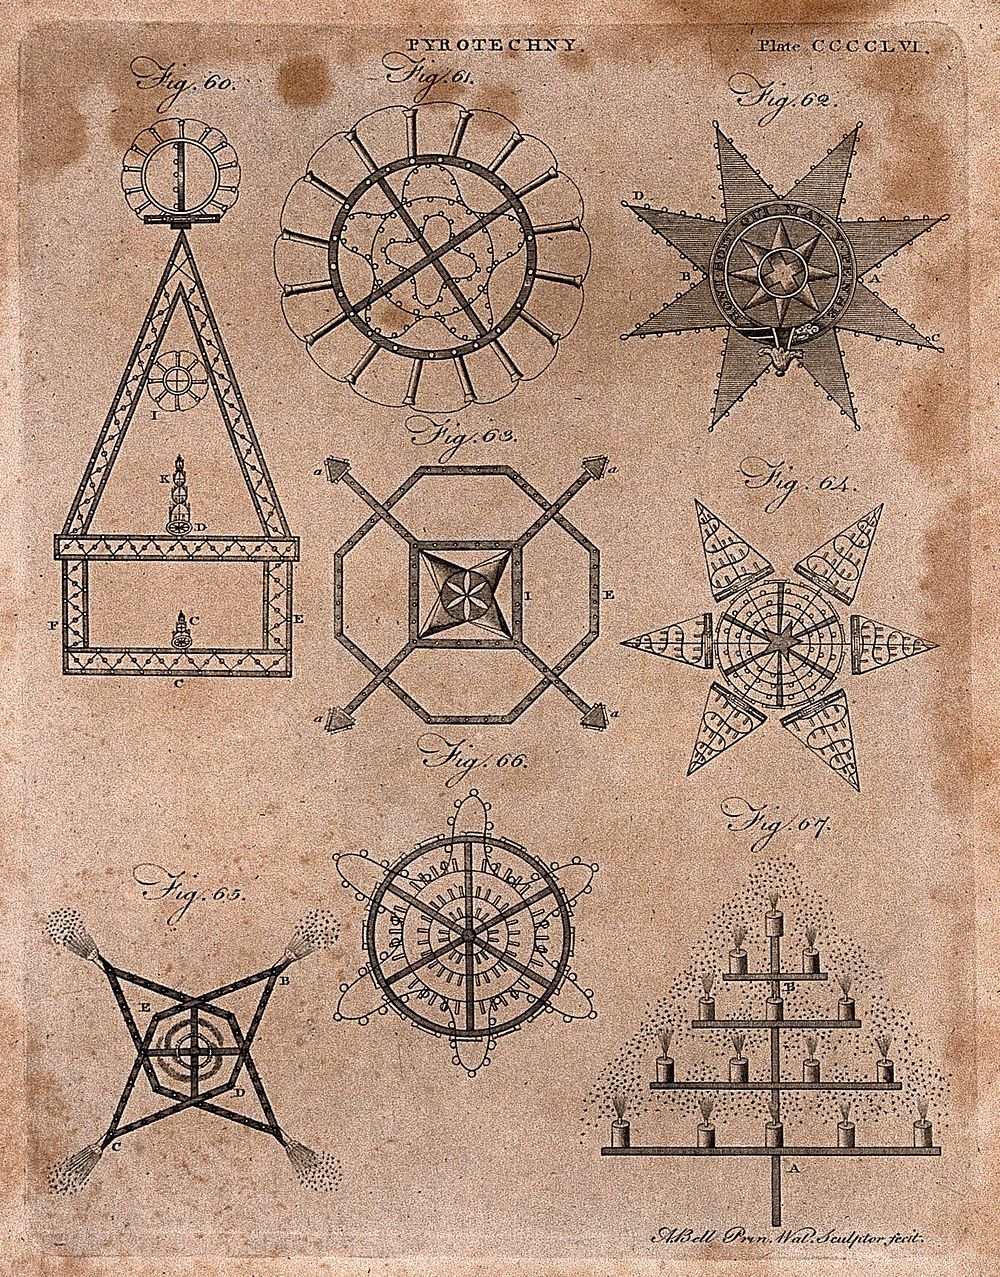 Pyrotechny: designs for fireworks. Engraving by A. Bell.